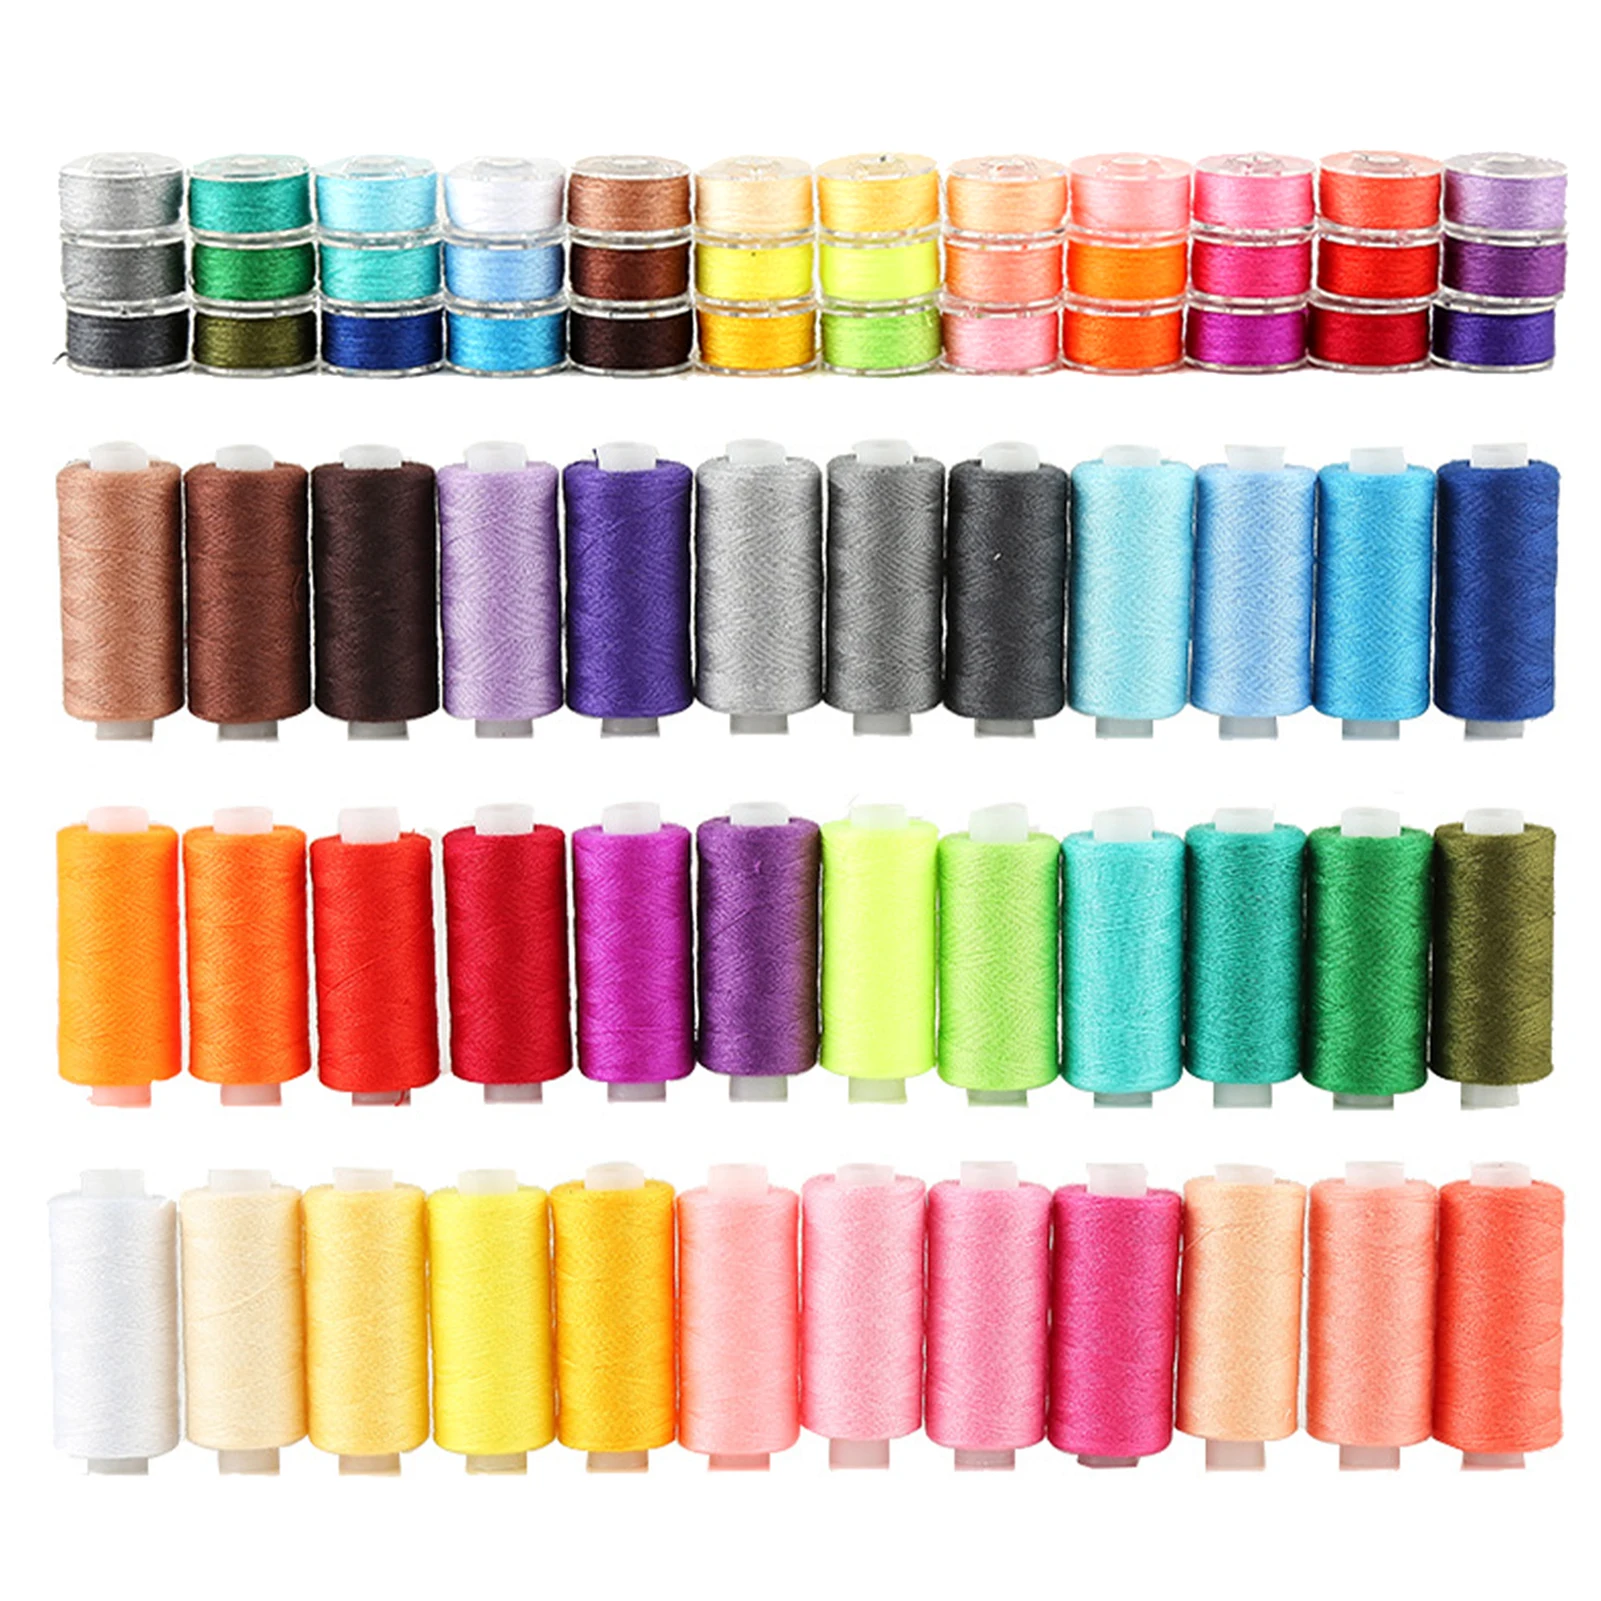 

72pcs Polyester Spools 38yards 400yards With Case For Machine Accessories 36 Colors Prewound Bobbin Sewing Thread Set Embroidery